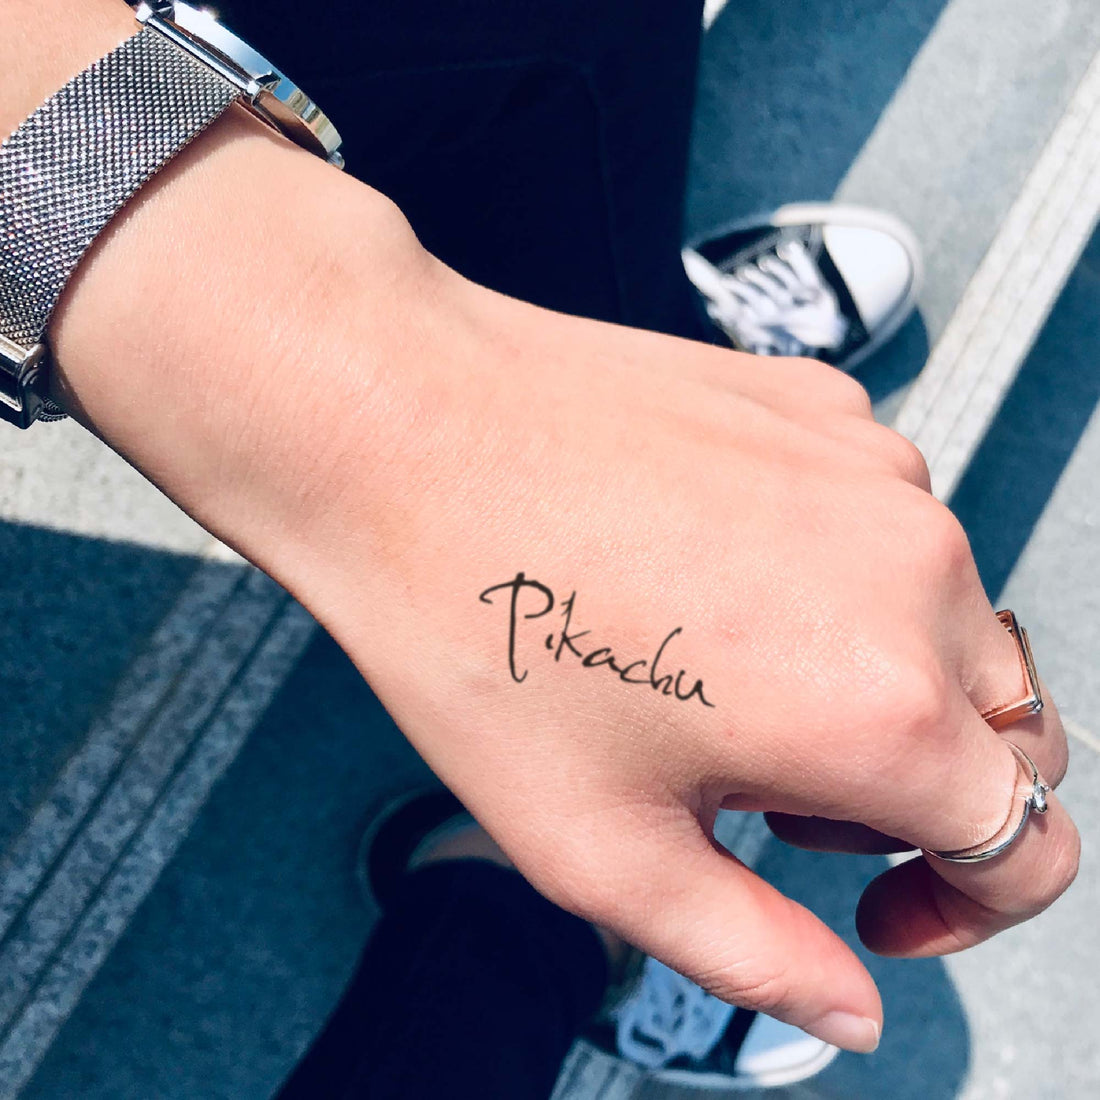 Pikachu pokemon custom temporary tattoo sticker design idea inspiration meanings removal arm wrist hand words font name signature calligraphy lyrics tour concert outfits merch accessory gift souvenir costumes wear dress up code